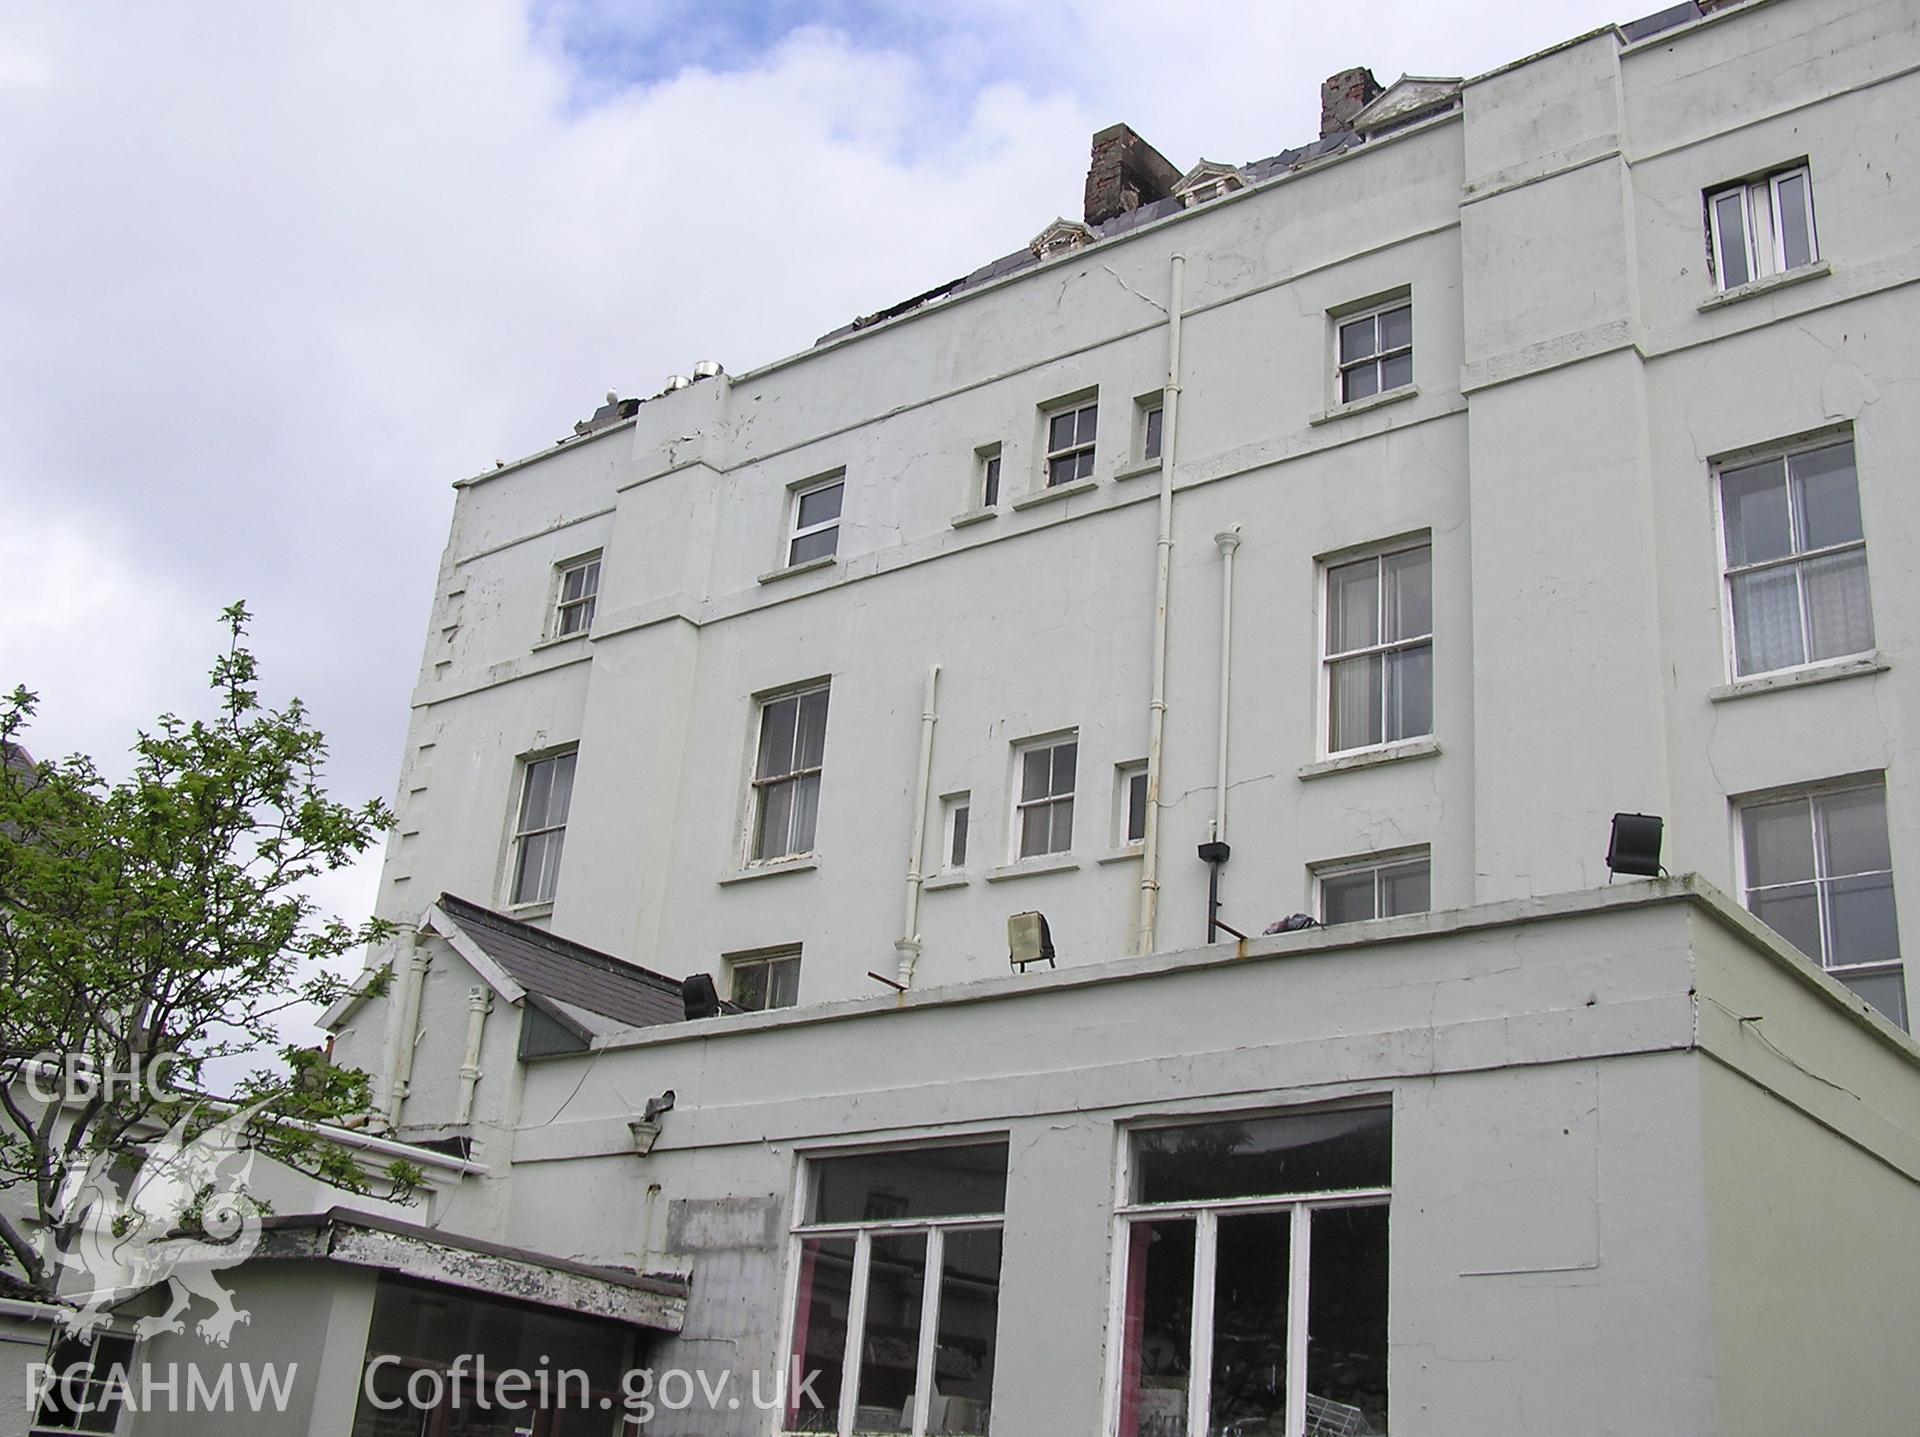 Colour digital photograph showing the damaged rear of the Royal Gatehouse Hotel.